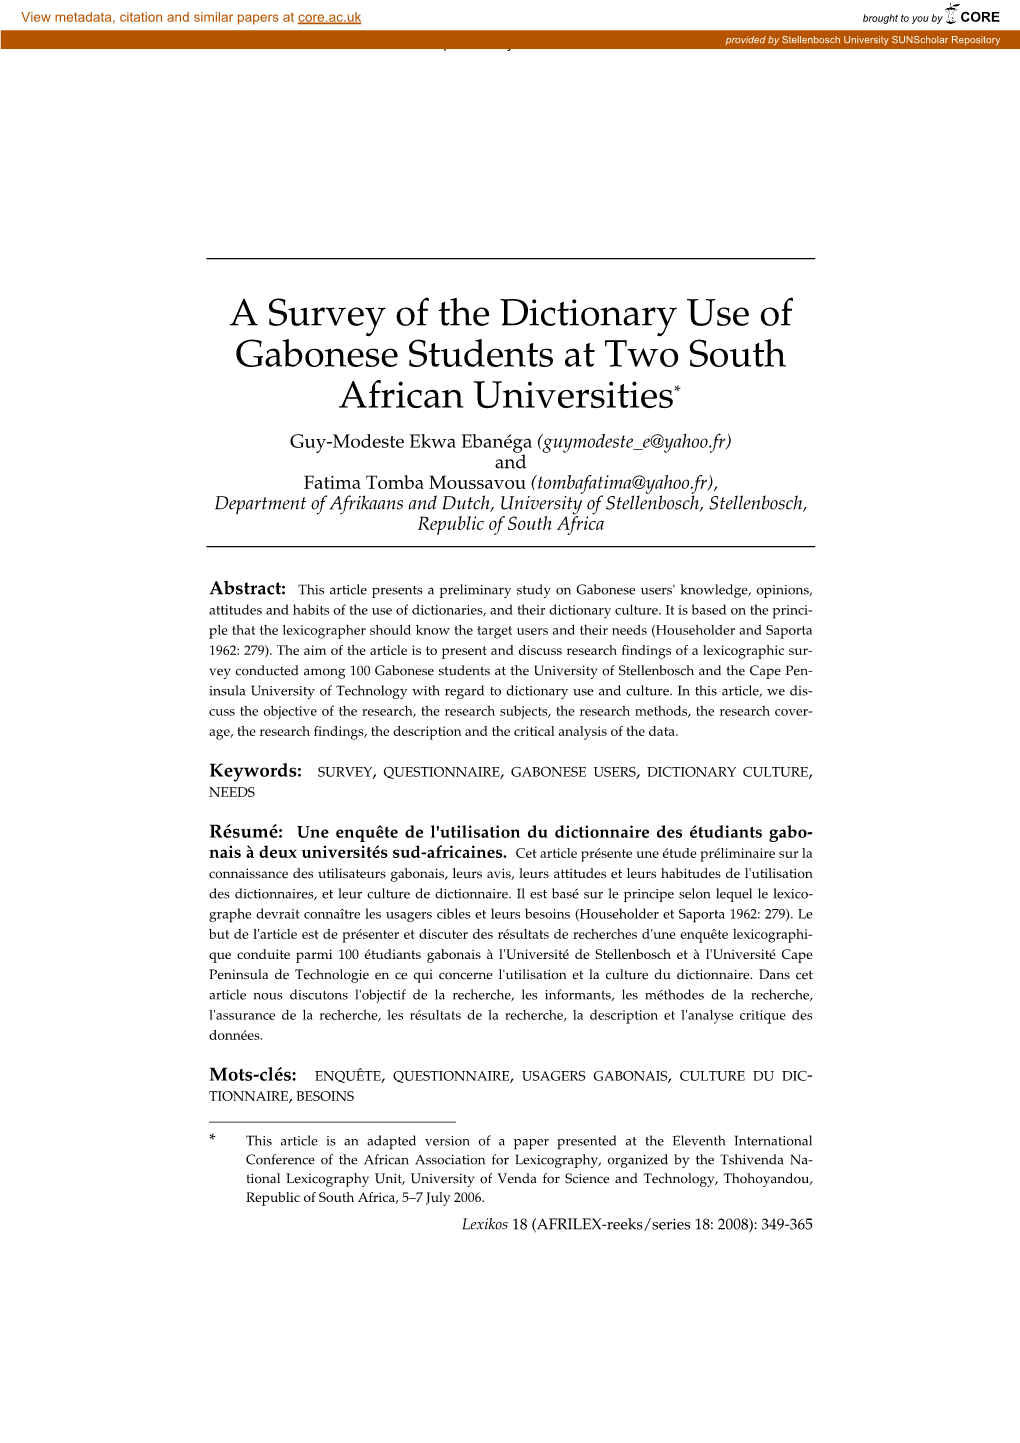 A Survey of the Dictionary Use of Gabonese Students at Two